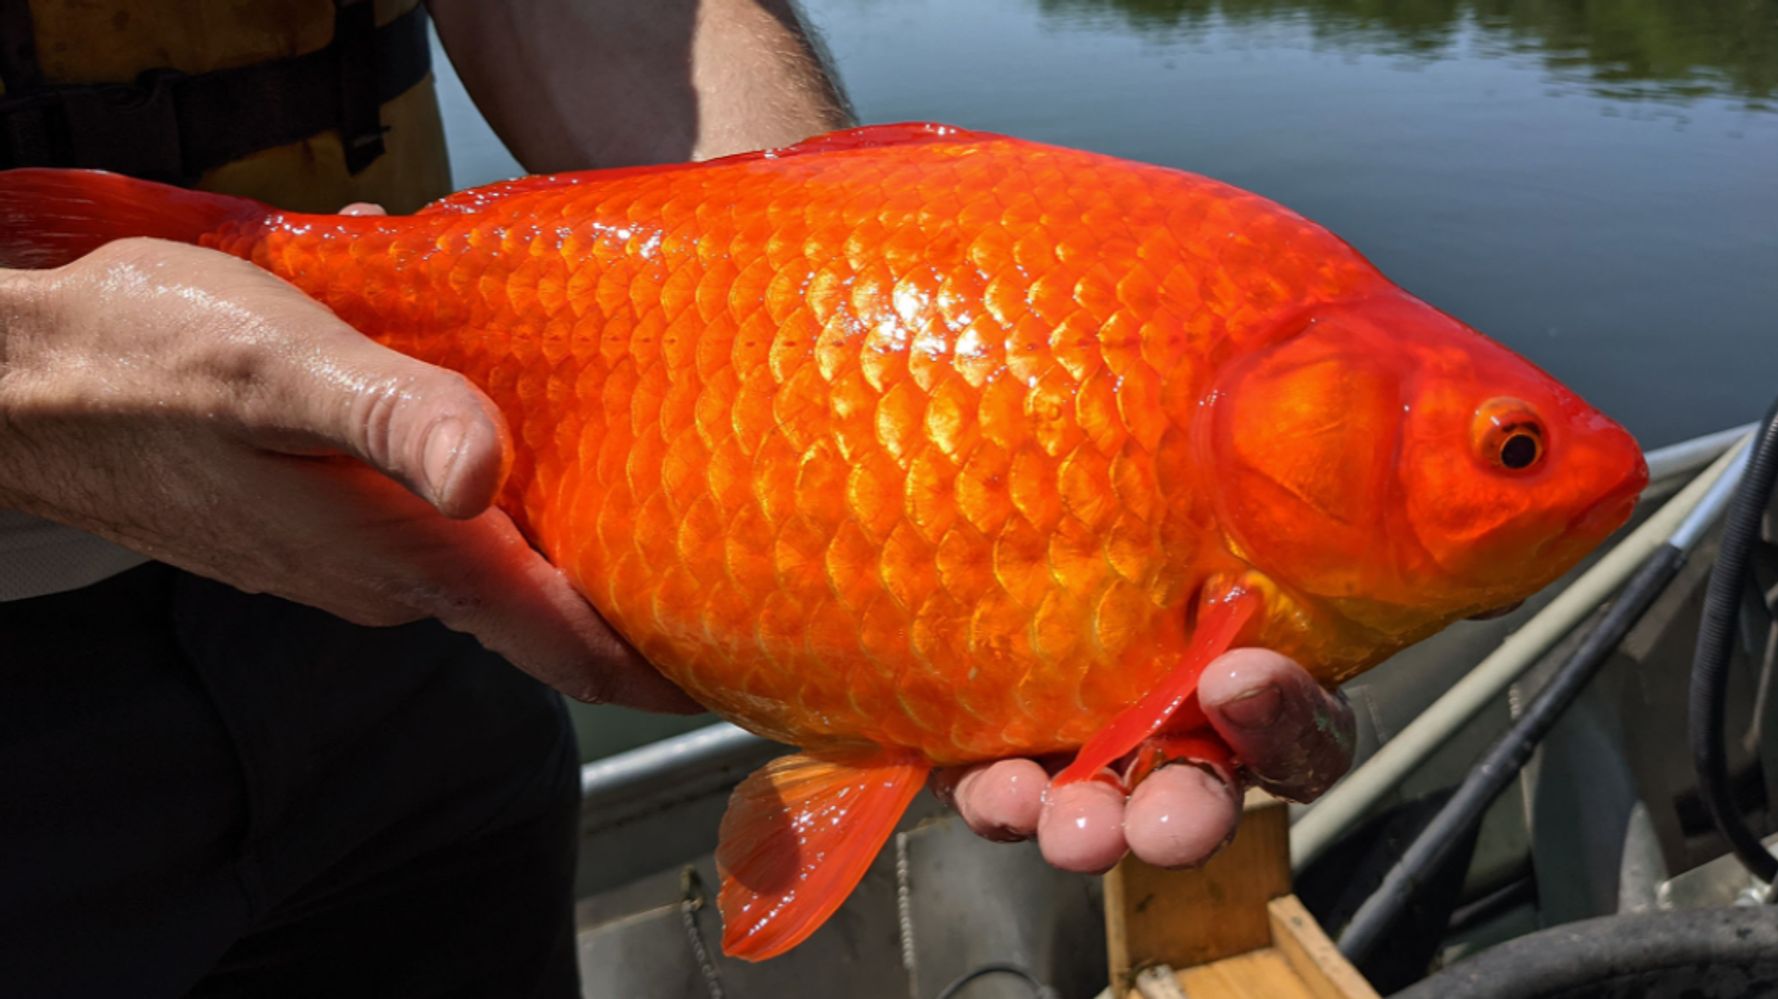 See The Dumped Goldfish Growing To The Size Of Footballs In Minnesota's Waterways